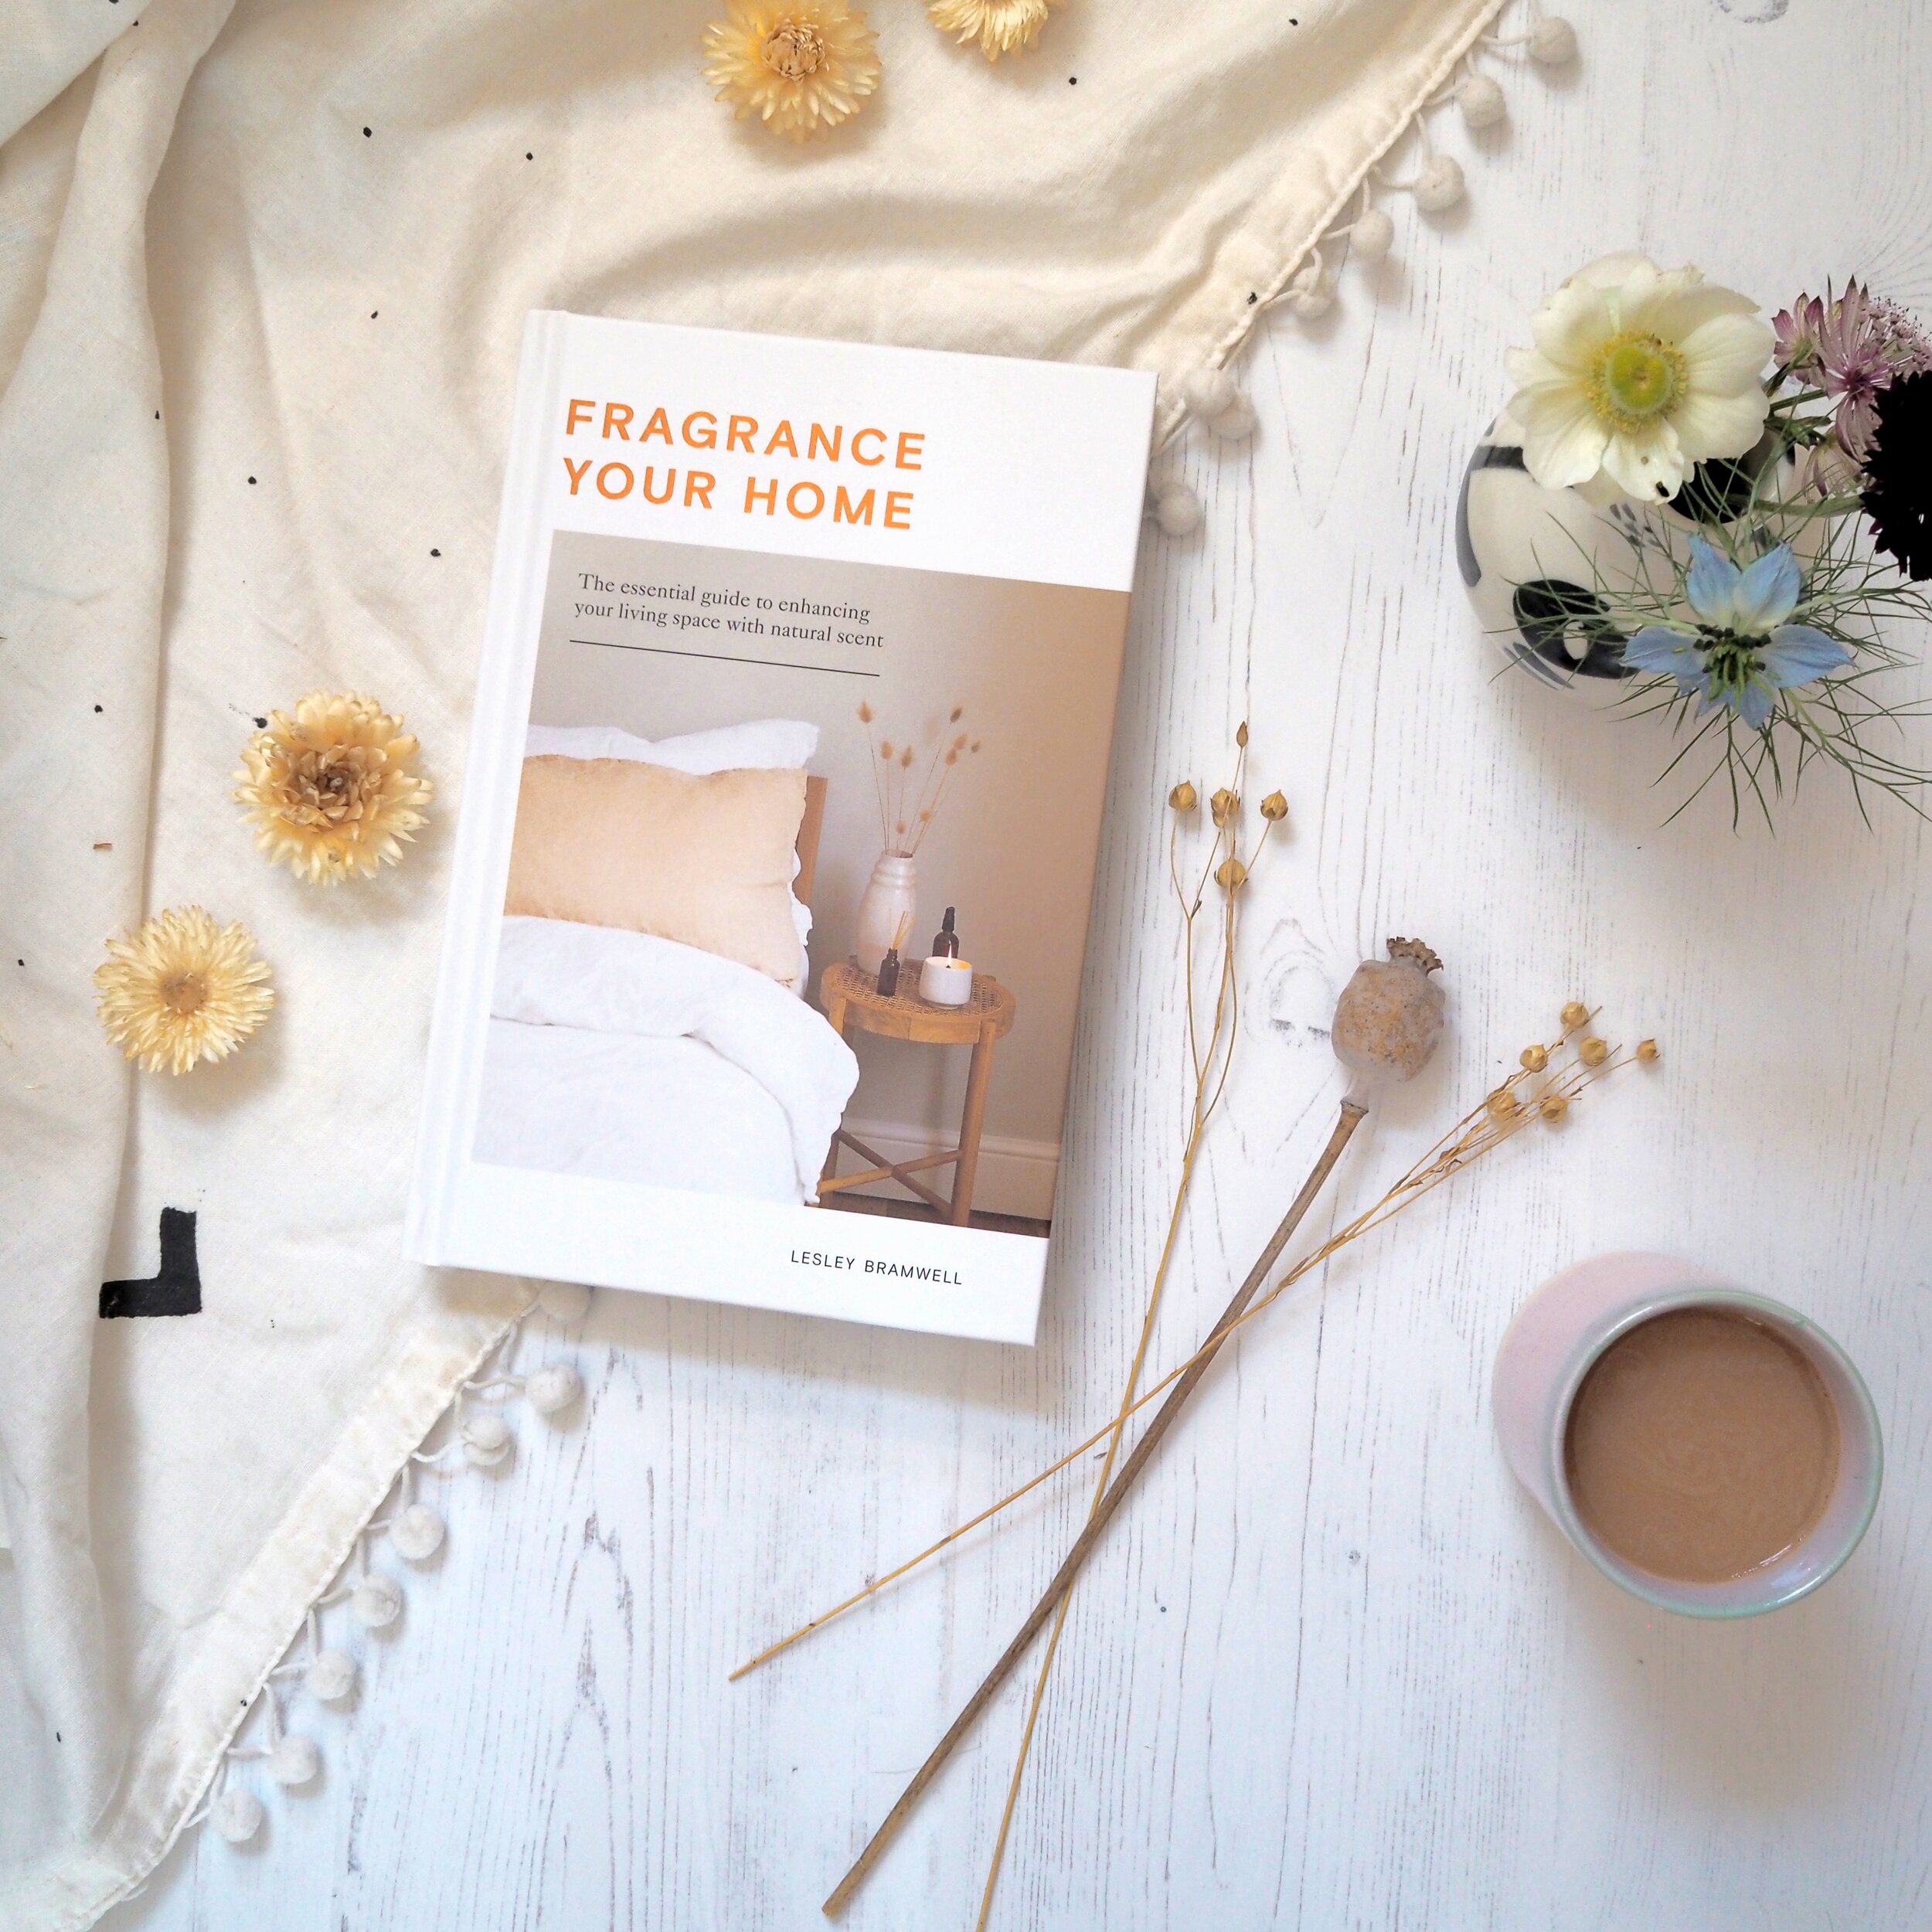 Fragrance your home - an essential guide to enhancing your living space with natural scent